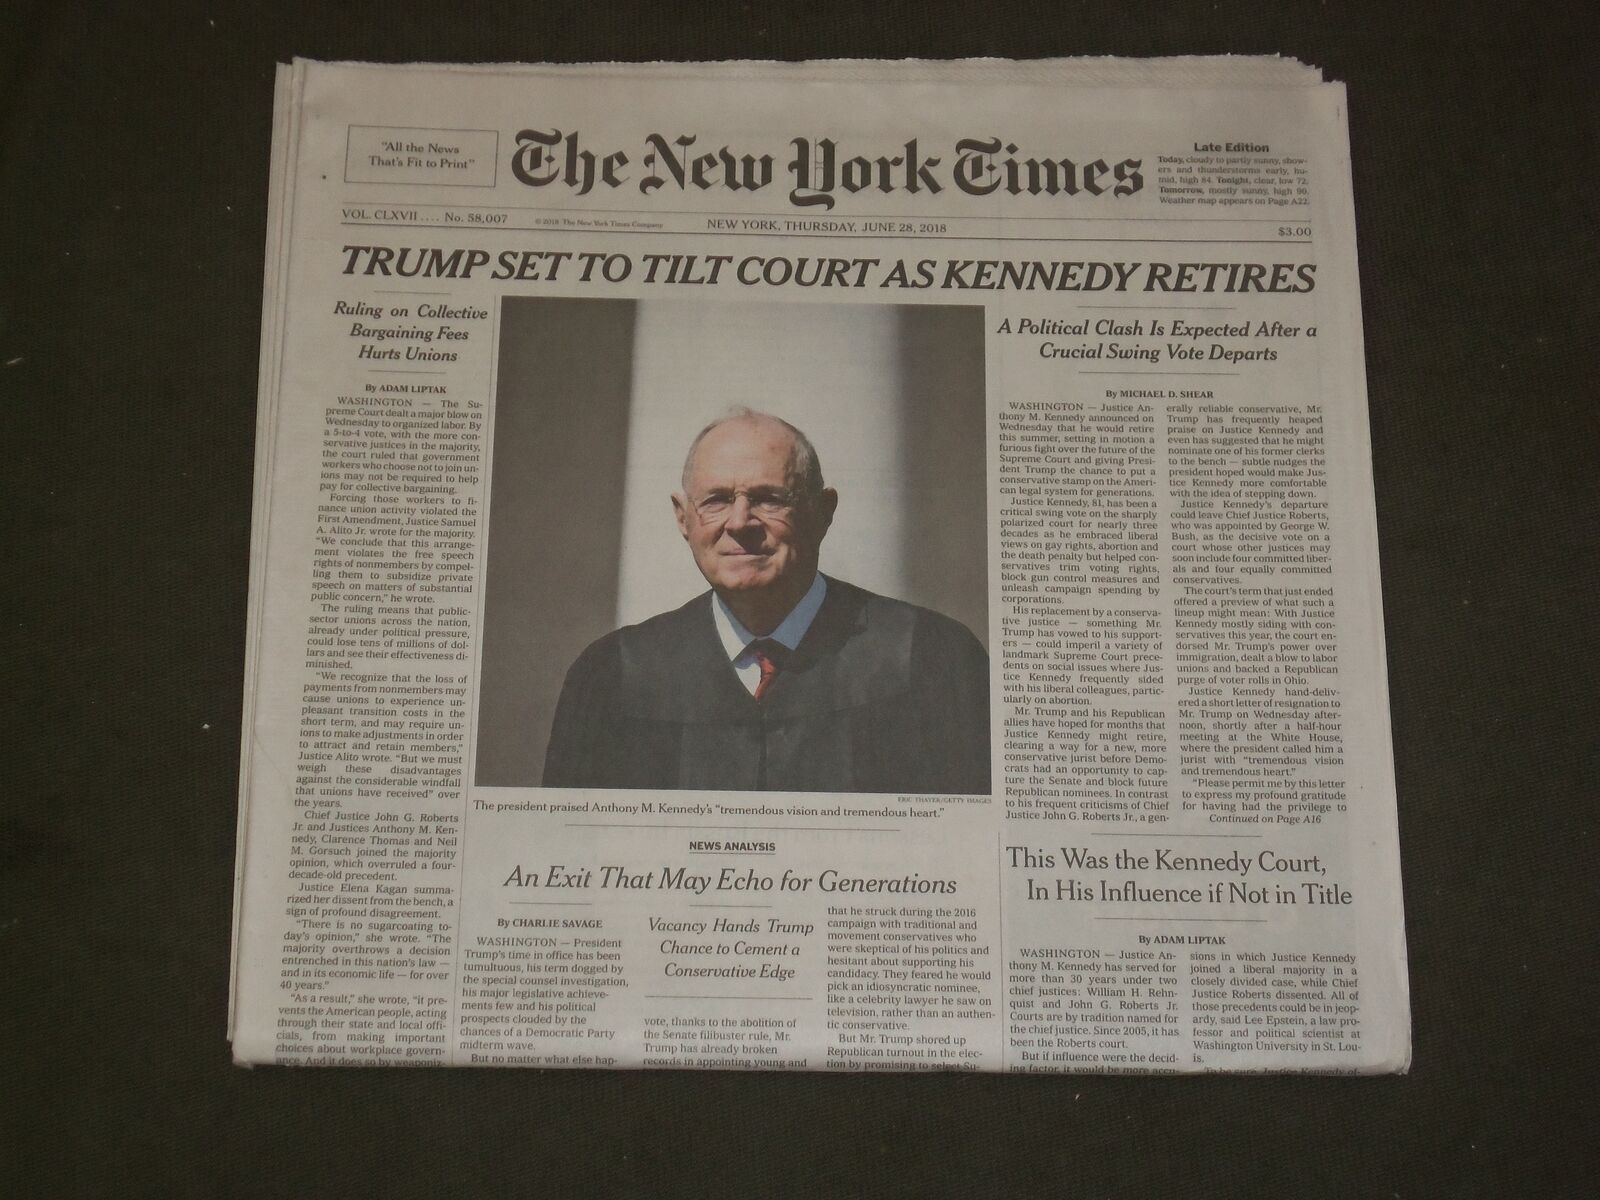 2018 JUNE 28 NEW YORK TIMES - TRUMP SET TO TILT COURT AS ANTHONY KENNEDY RETIRES